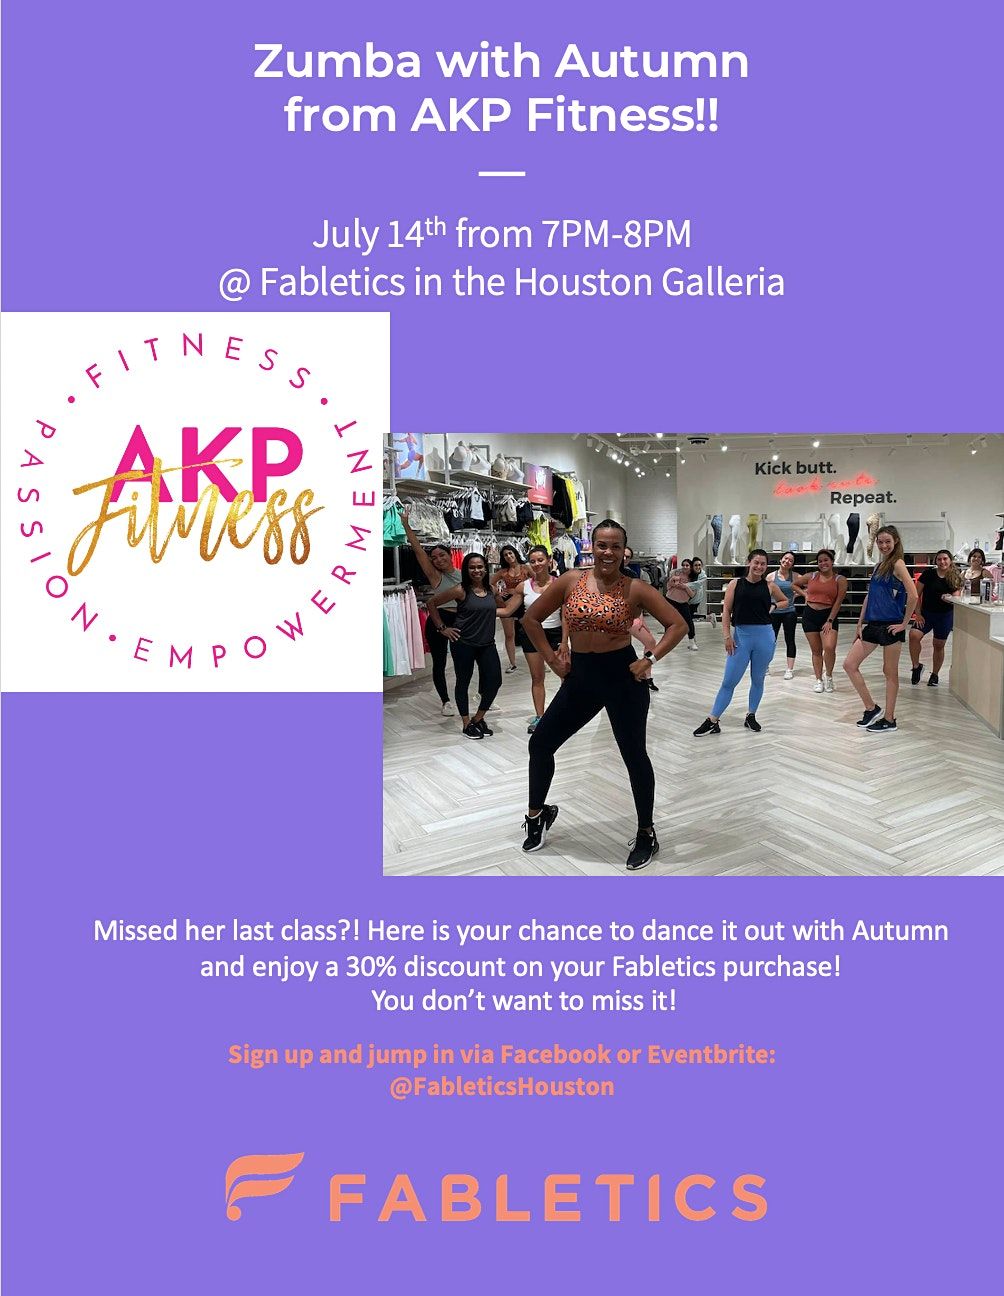 Get Moving with Autumn from AKP Fitness